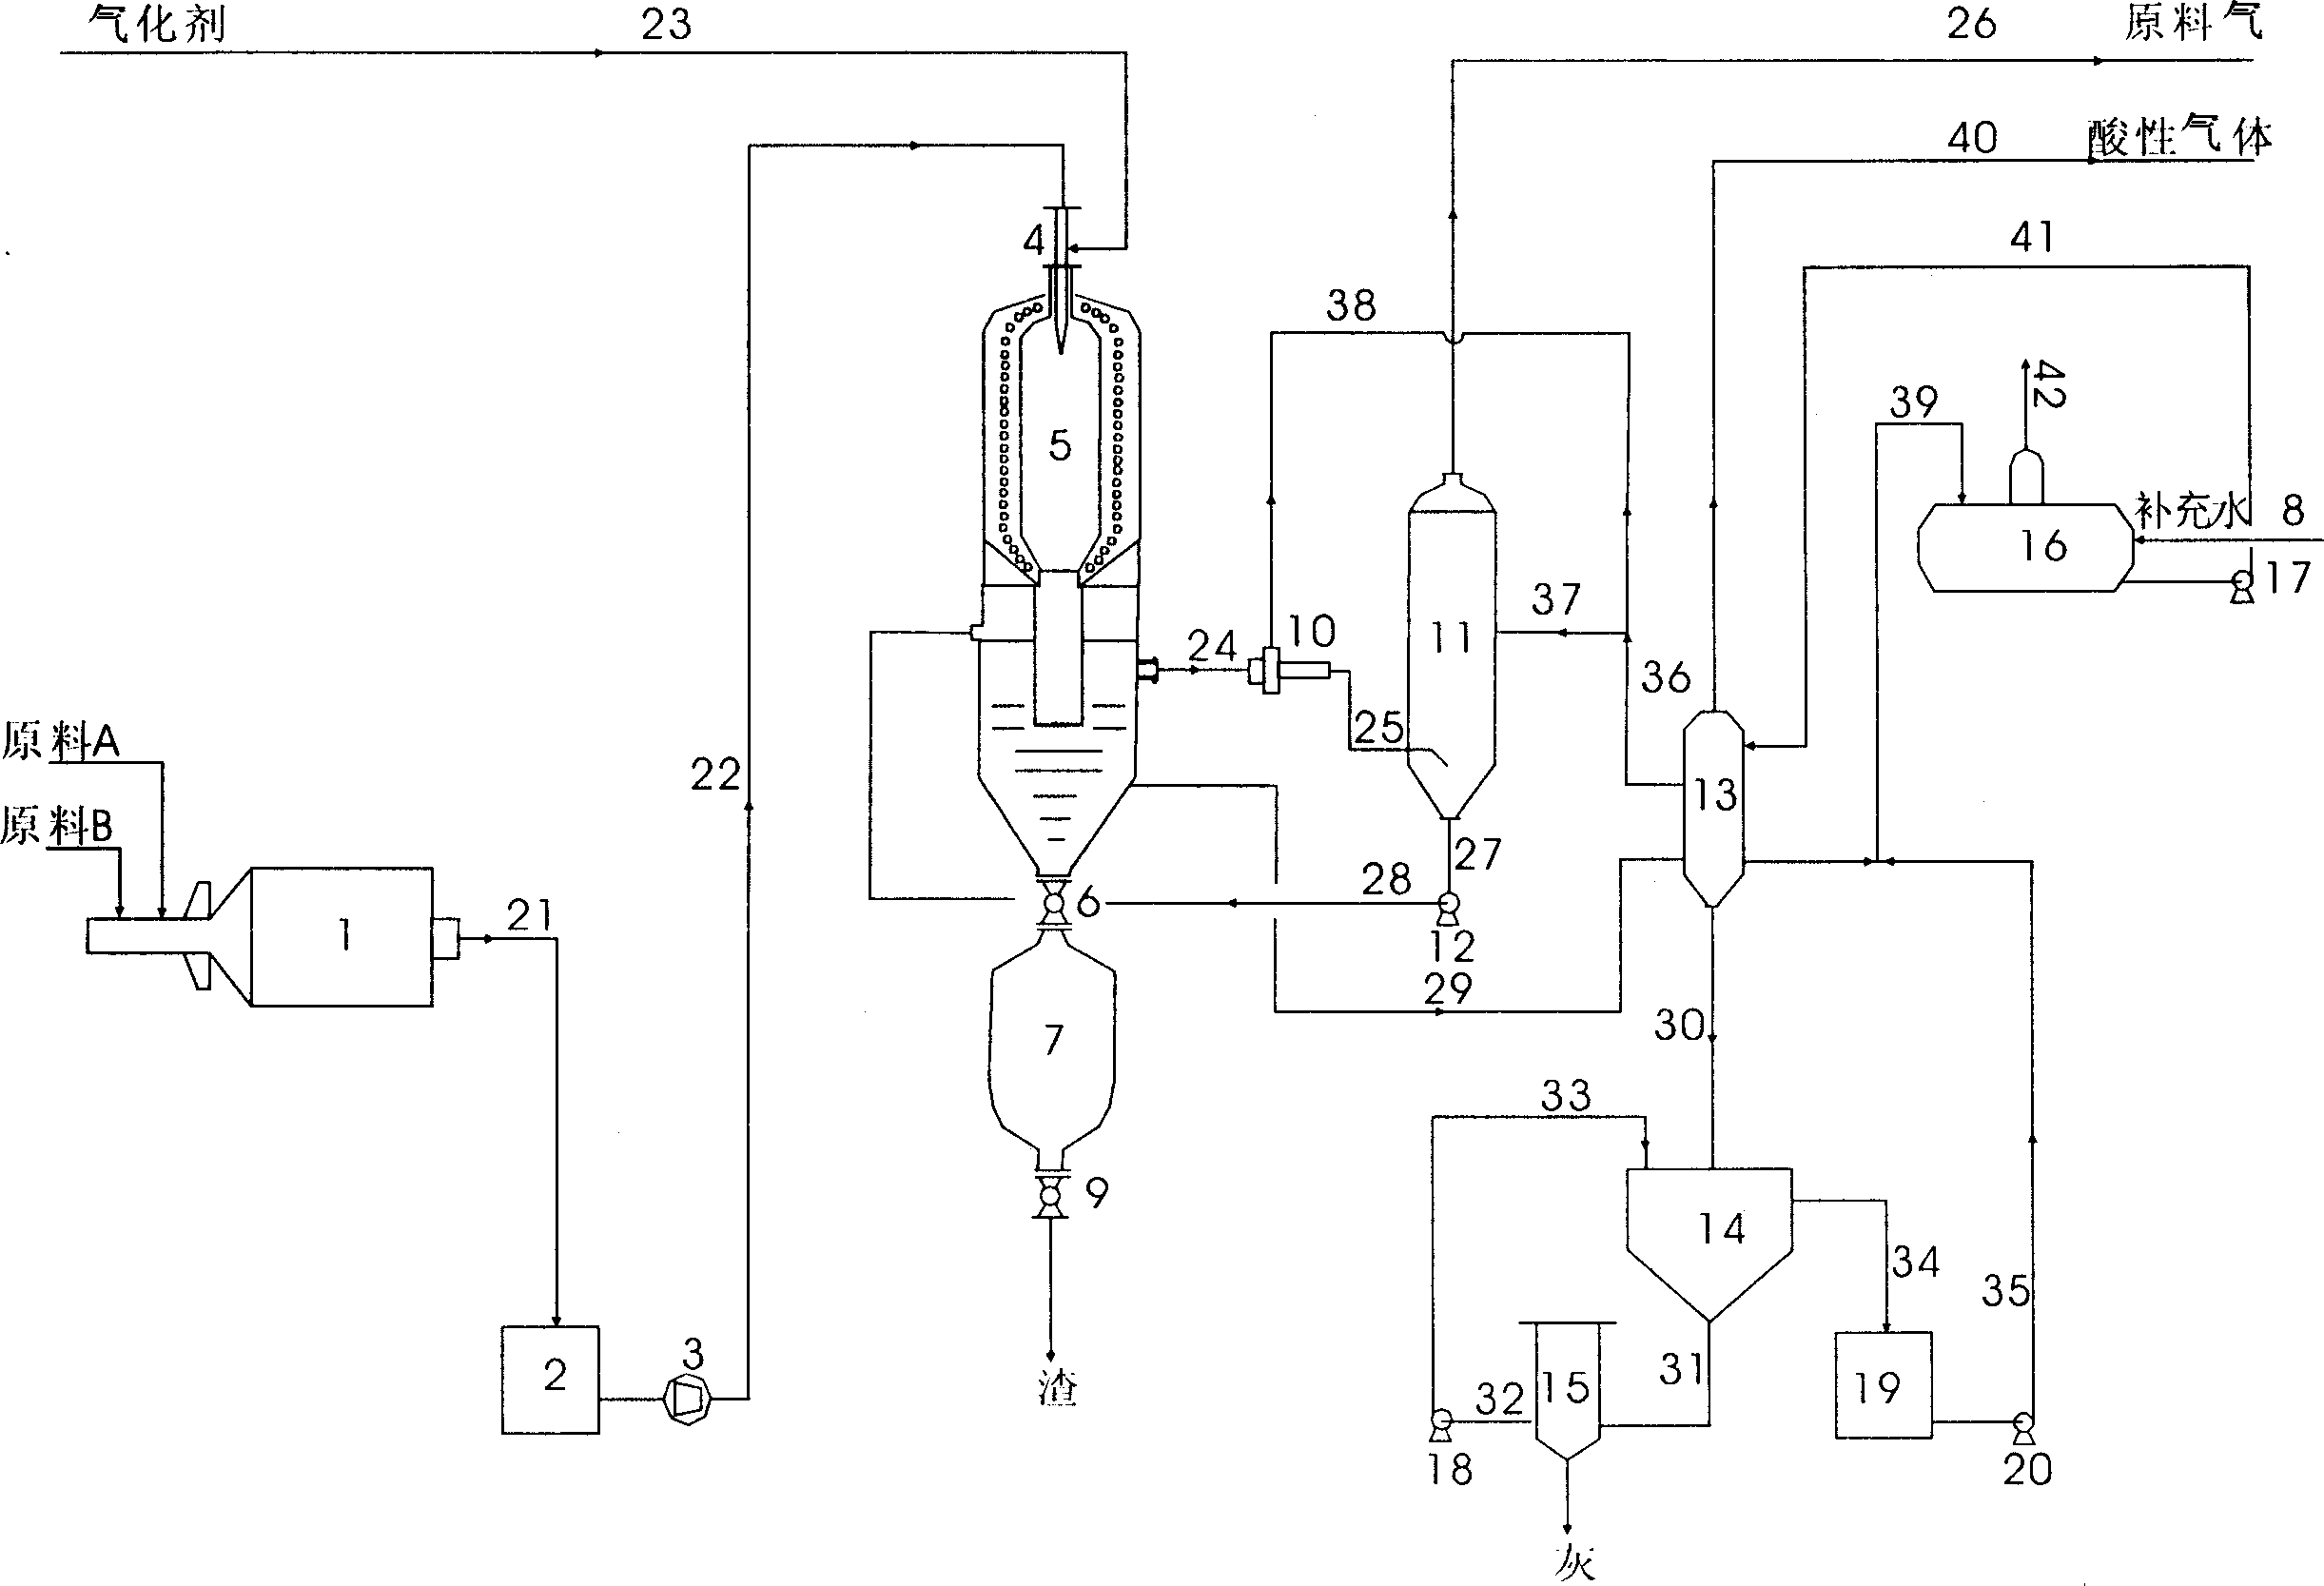 Pressurized gasifying process of polynary slurry